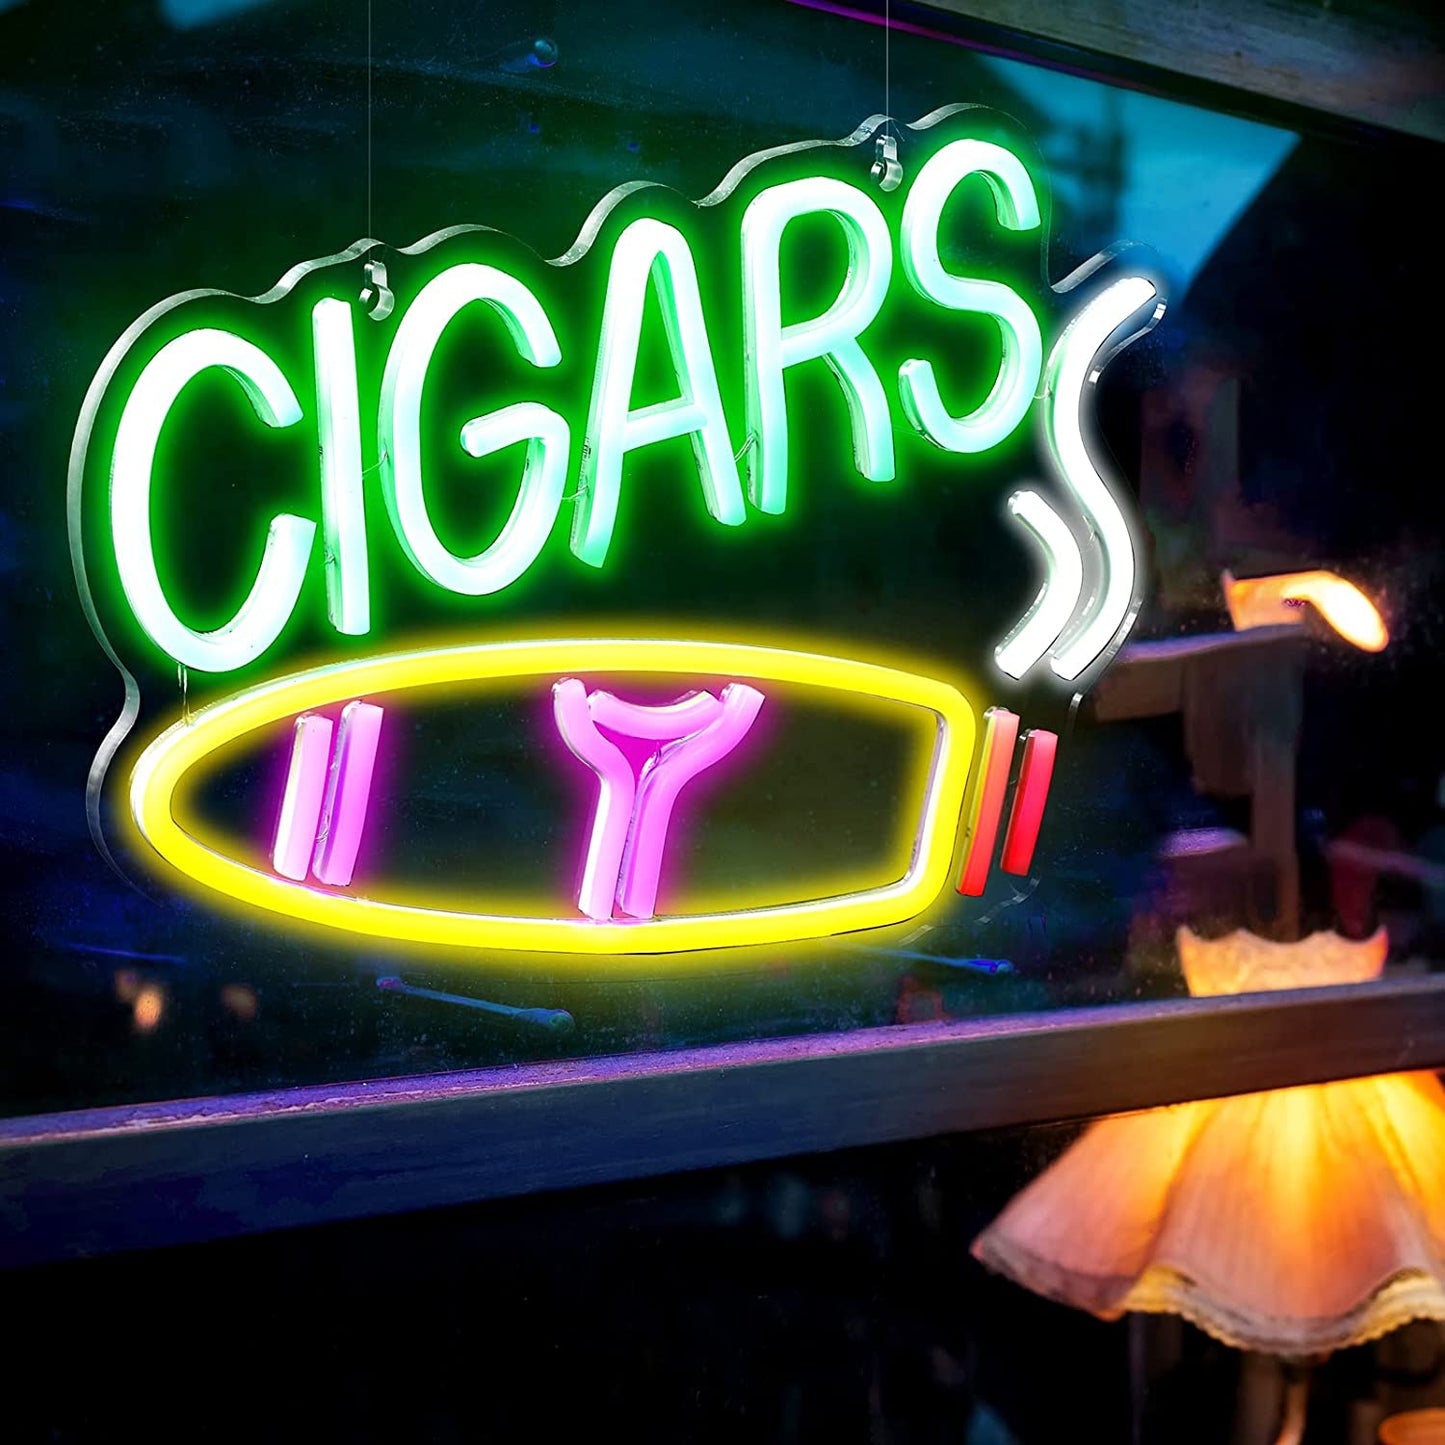 Bar Neon Signs Bar Neon Lights Decor for Man Cave 15.75 Inch Bar LED Sign USB Operated Decorative Bar Open Sign for Home Bar Store Hotel Pub Party Decor (Cool)